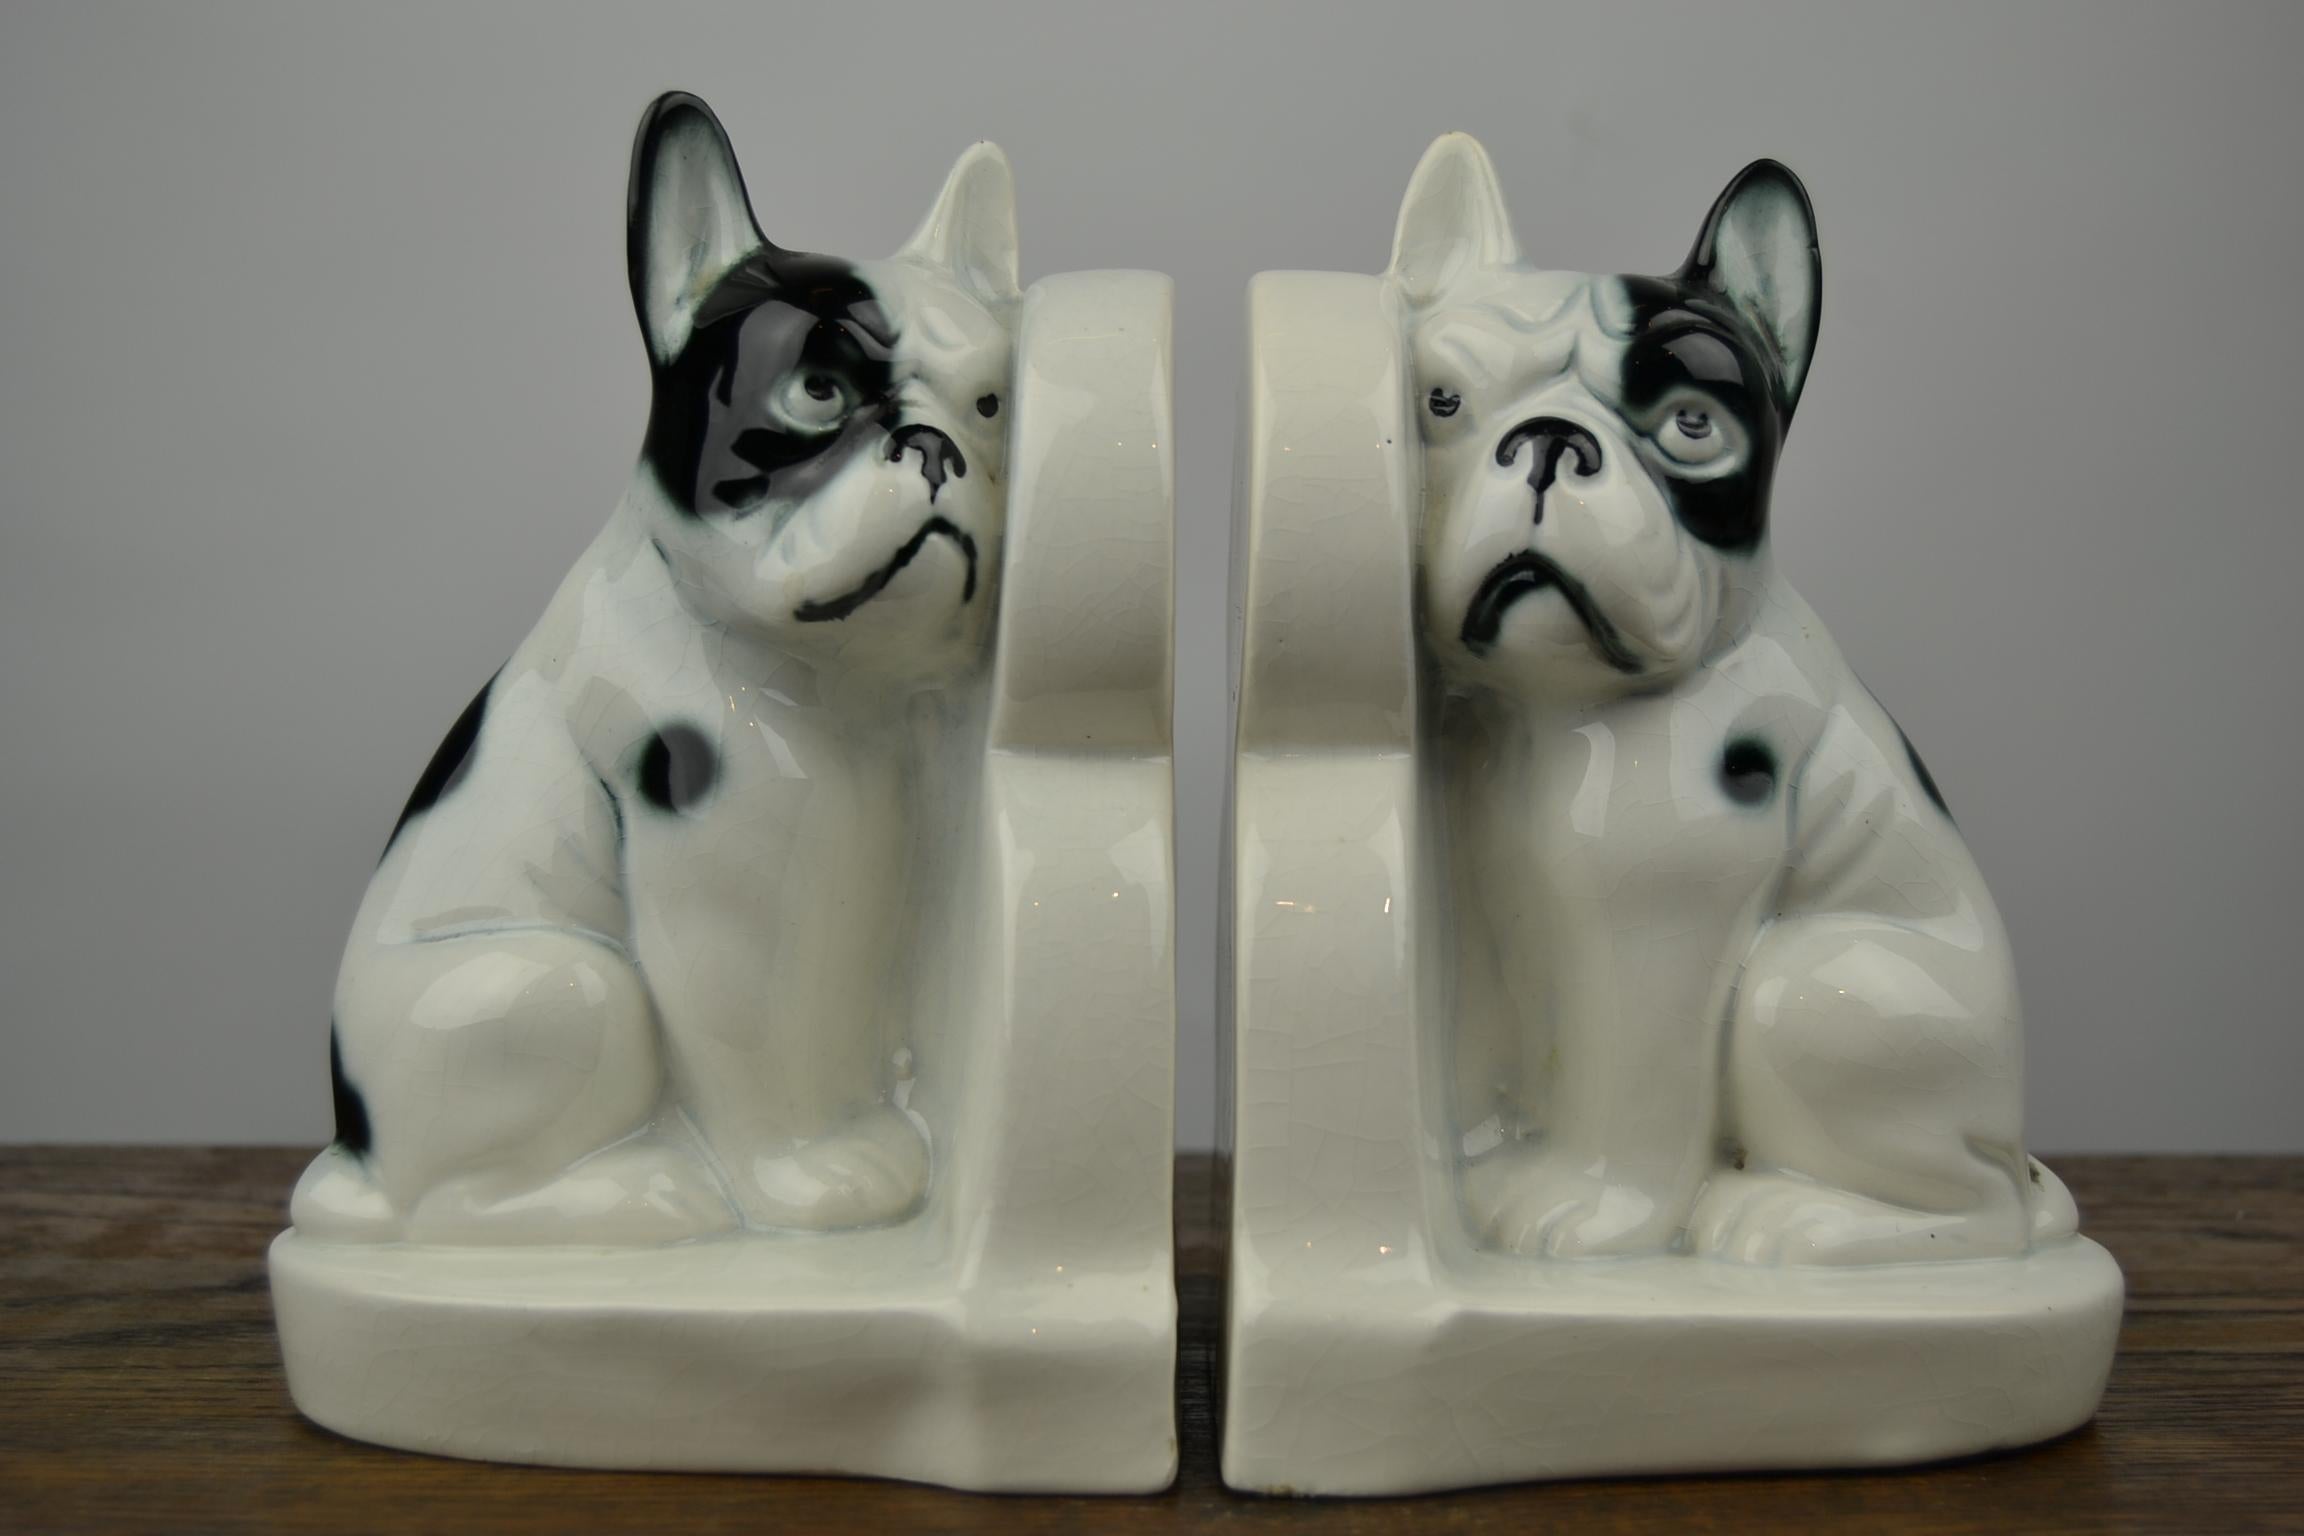 20th Century Art Deco Porcelain French Bulldog Bookends, Germany